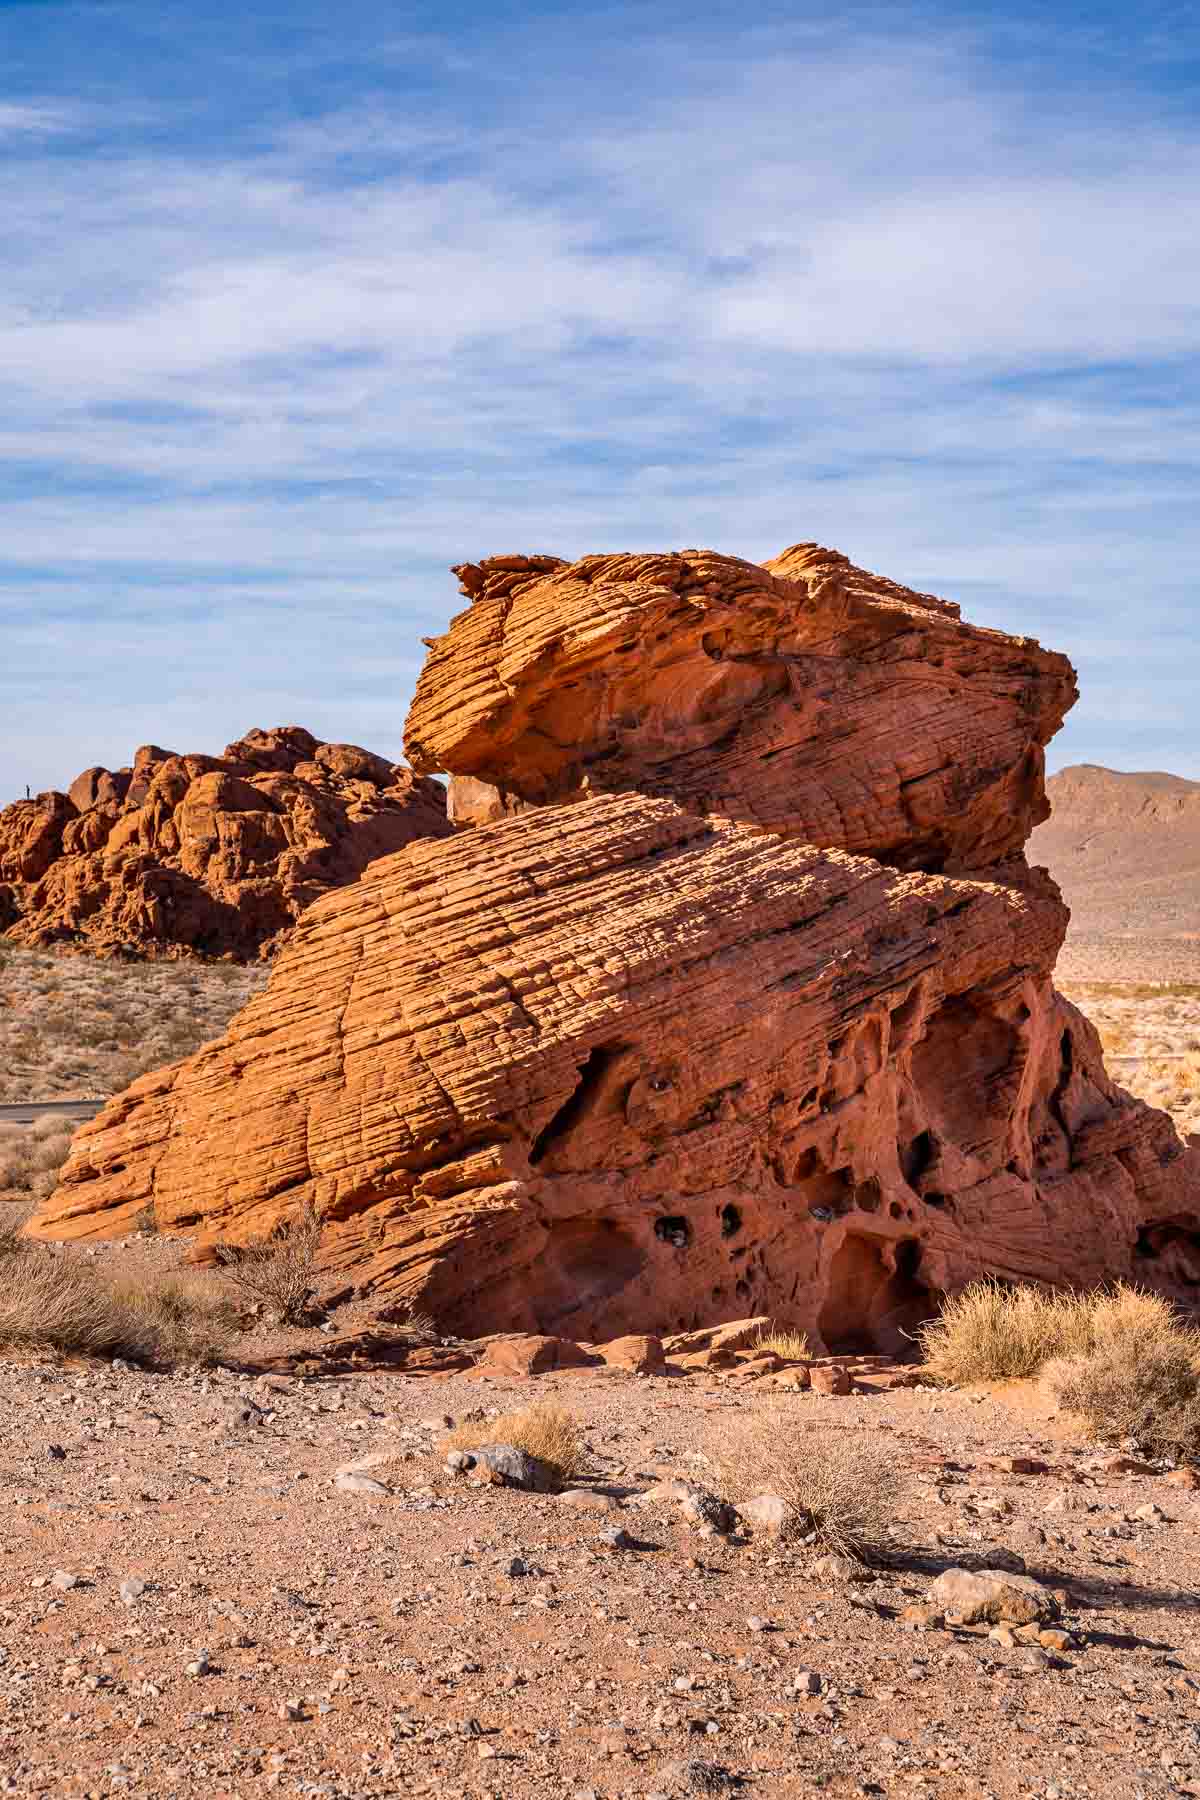 The beehives in Valley of Fire State Park